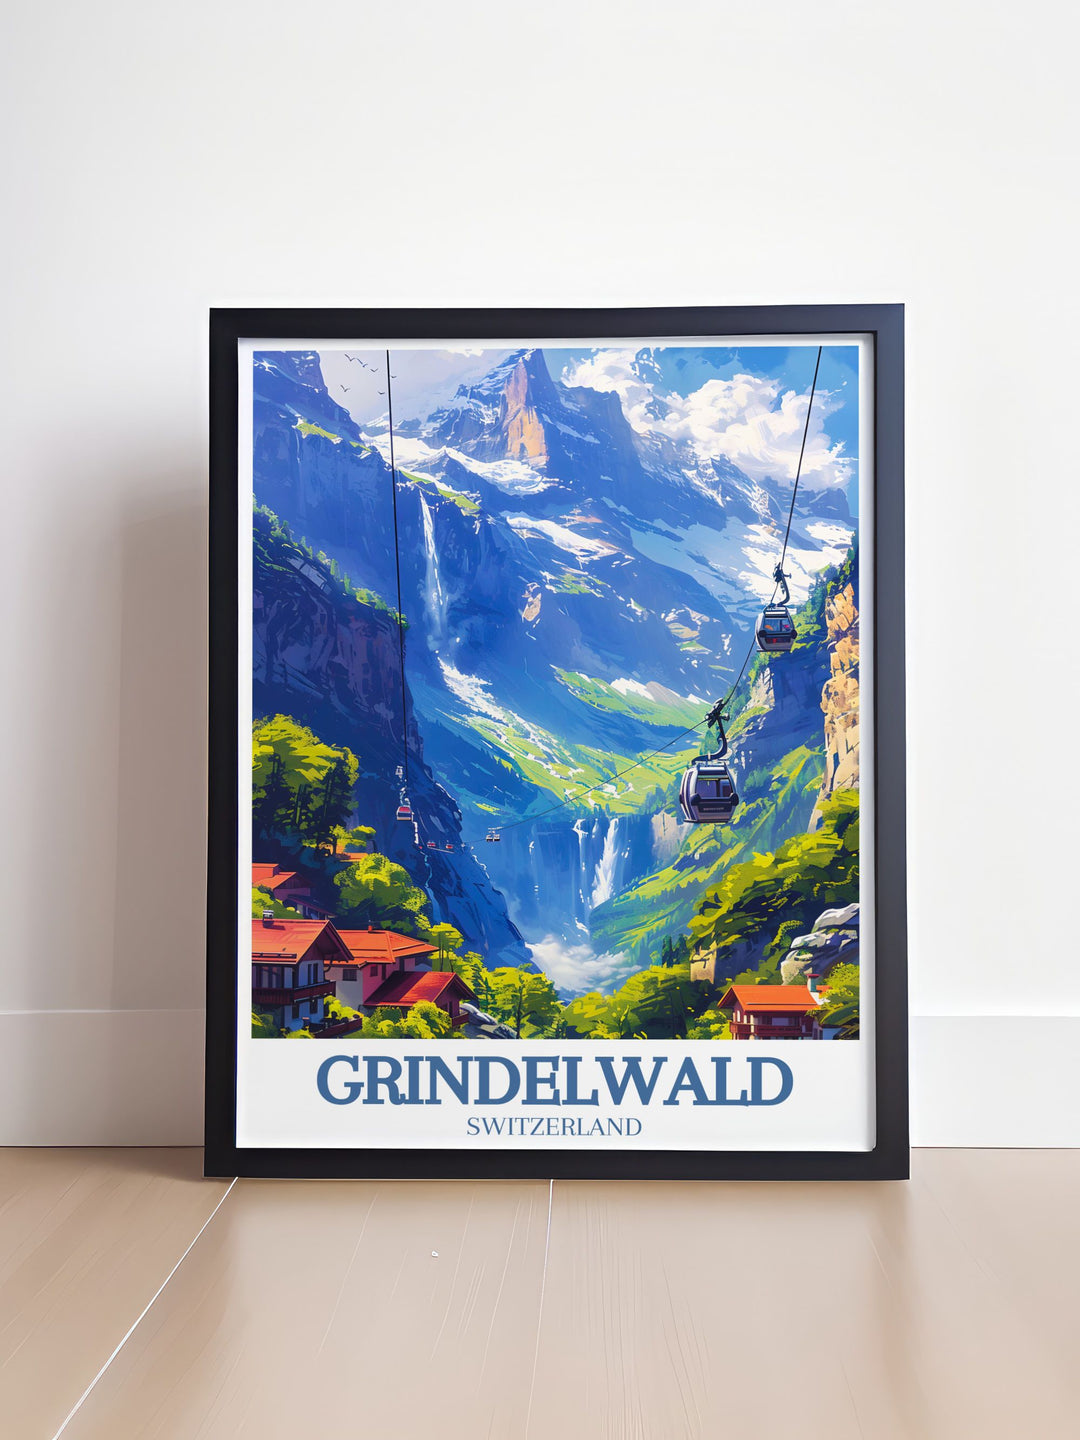 A detailed art print of Eiger mountain Grindelwald First capturing the essence of the Swiss Alps. This Grindelwald First artwork showcases the natural beauty and tranquility of the mountain village making it an ideal gift.